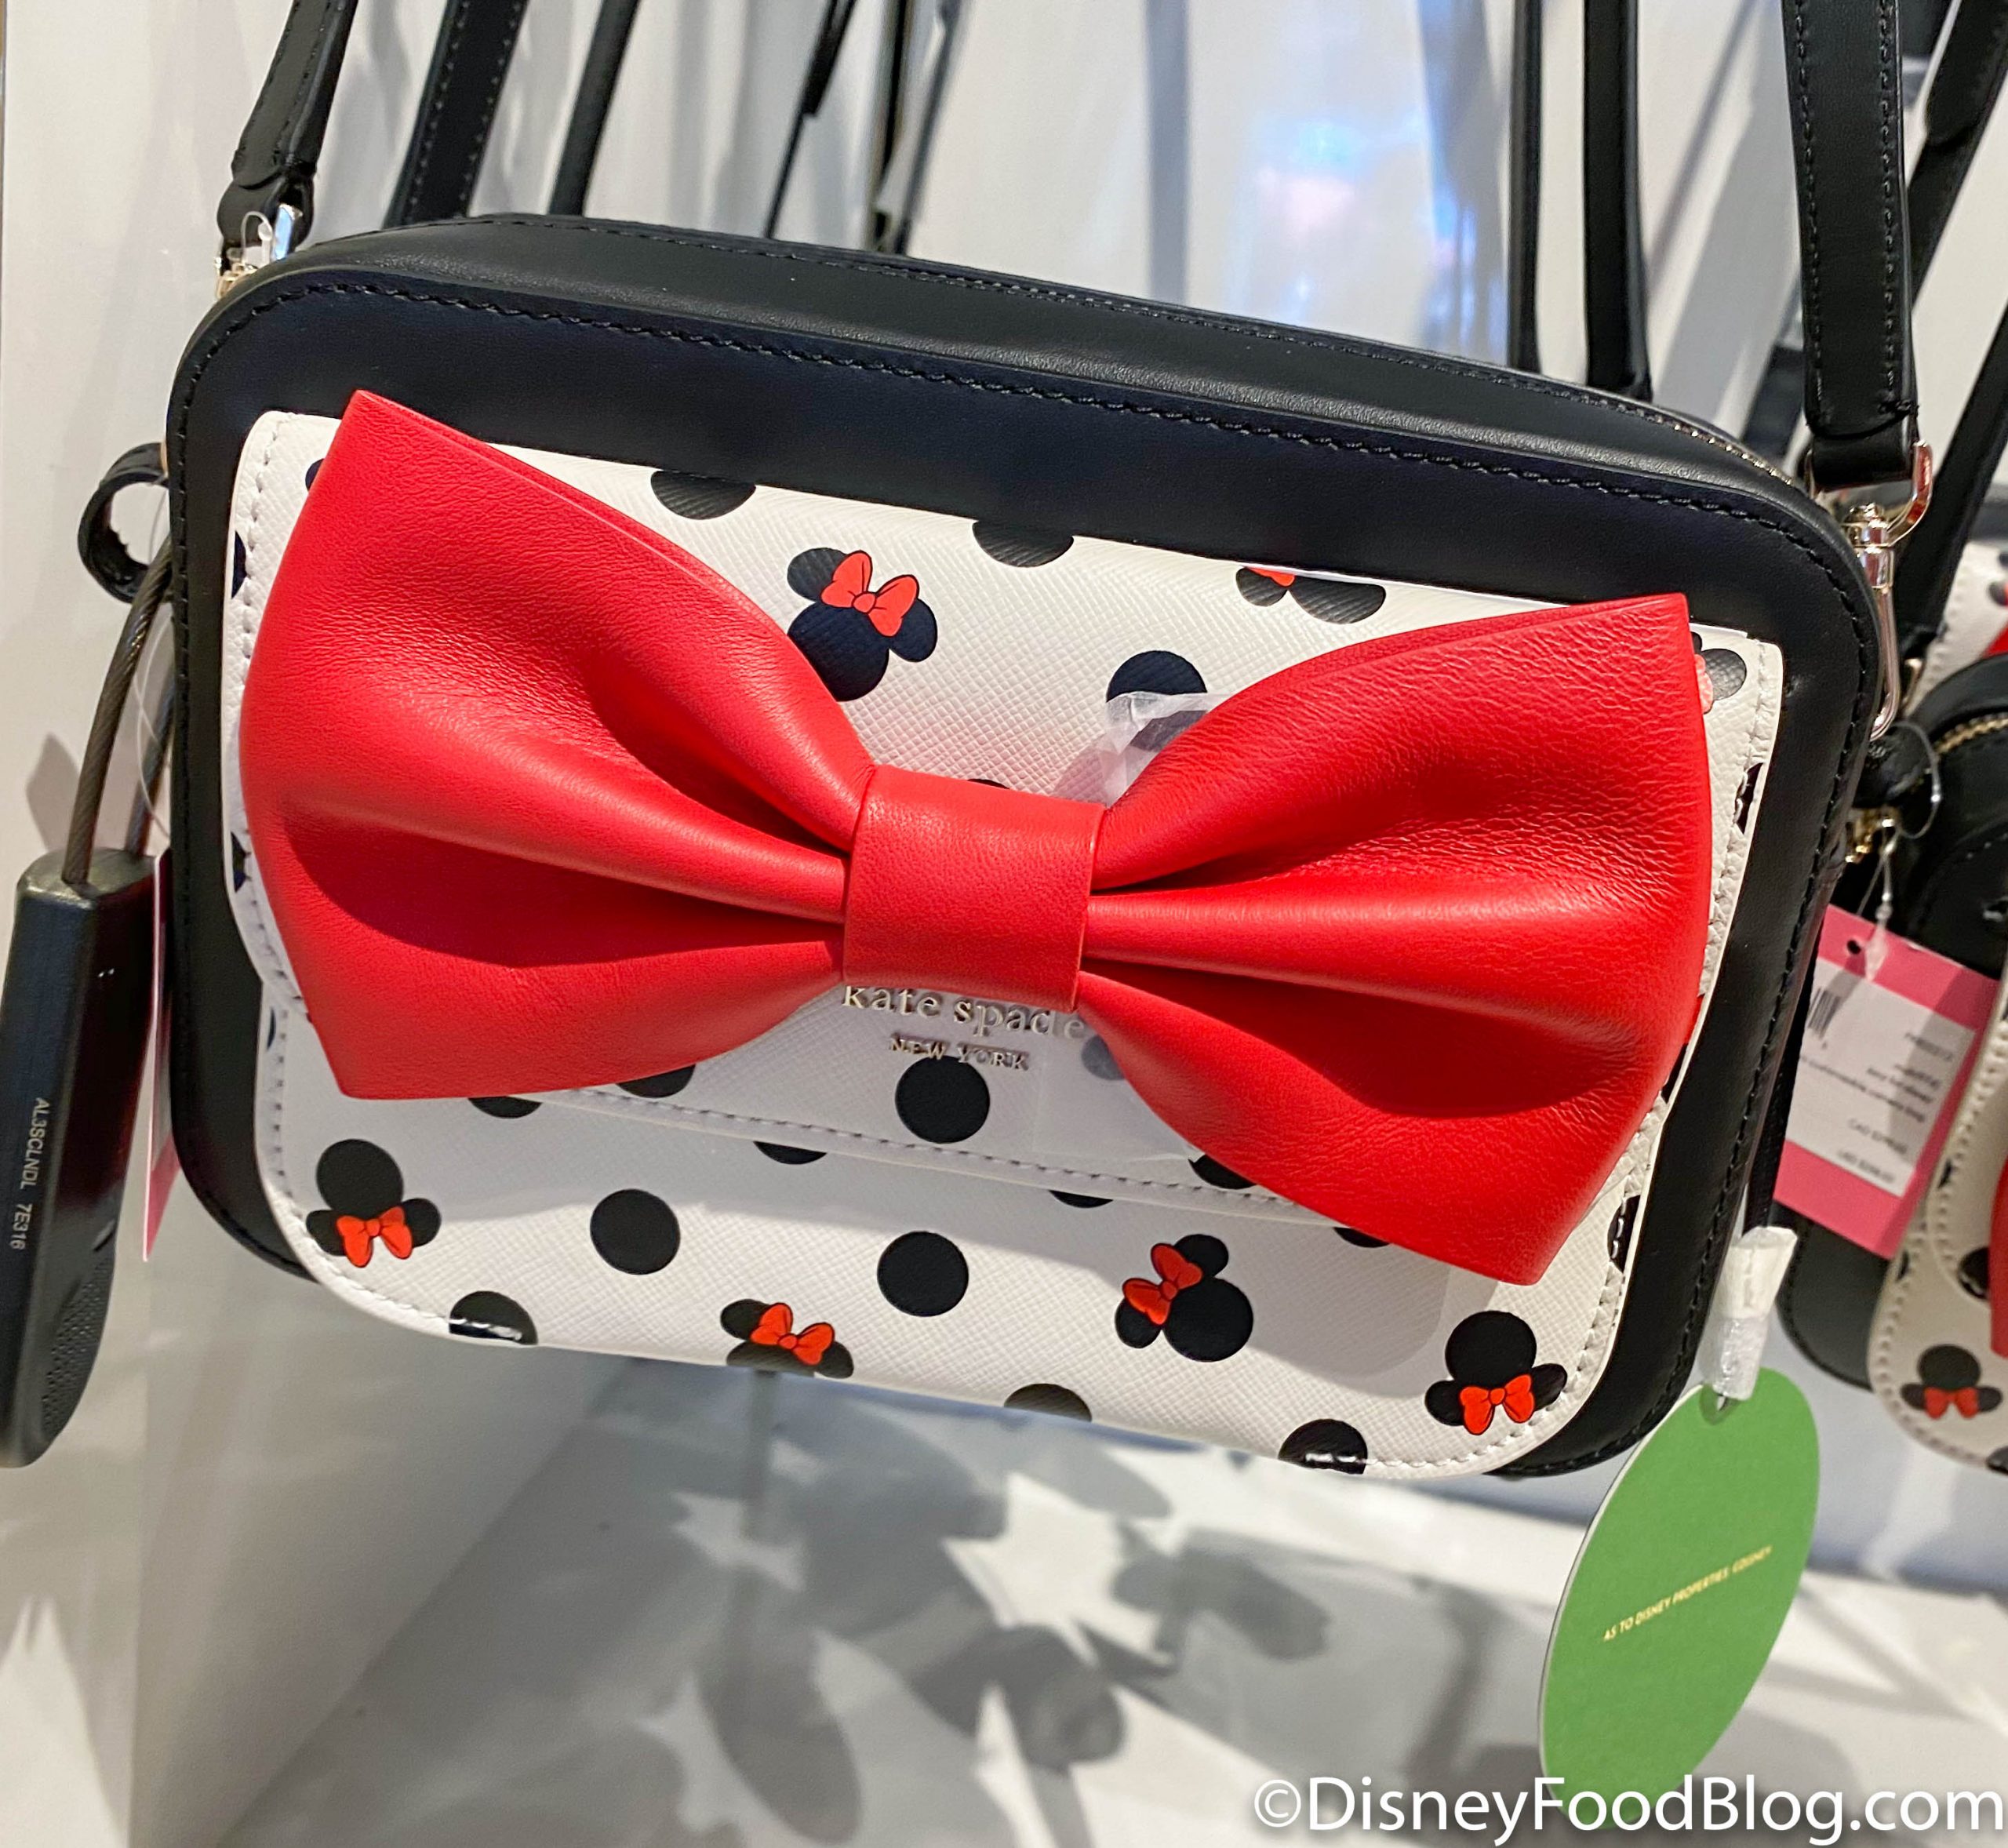 The New Kate Spade Minnie Mouse Collection Is Super Sassy - bags | Kate  spade minnie mouse, Kate spade, Kate spade accessories